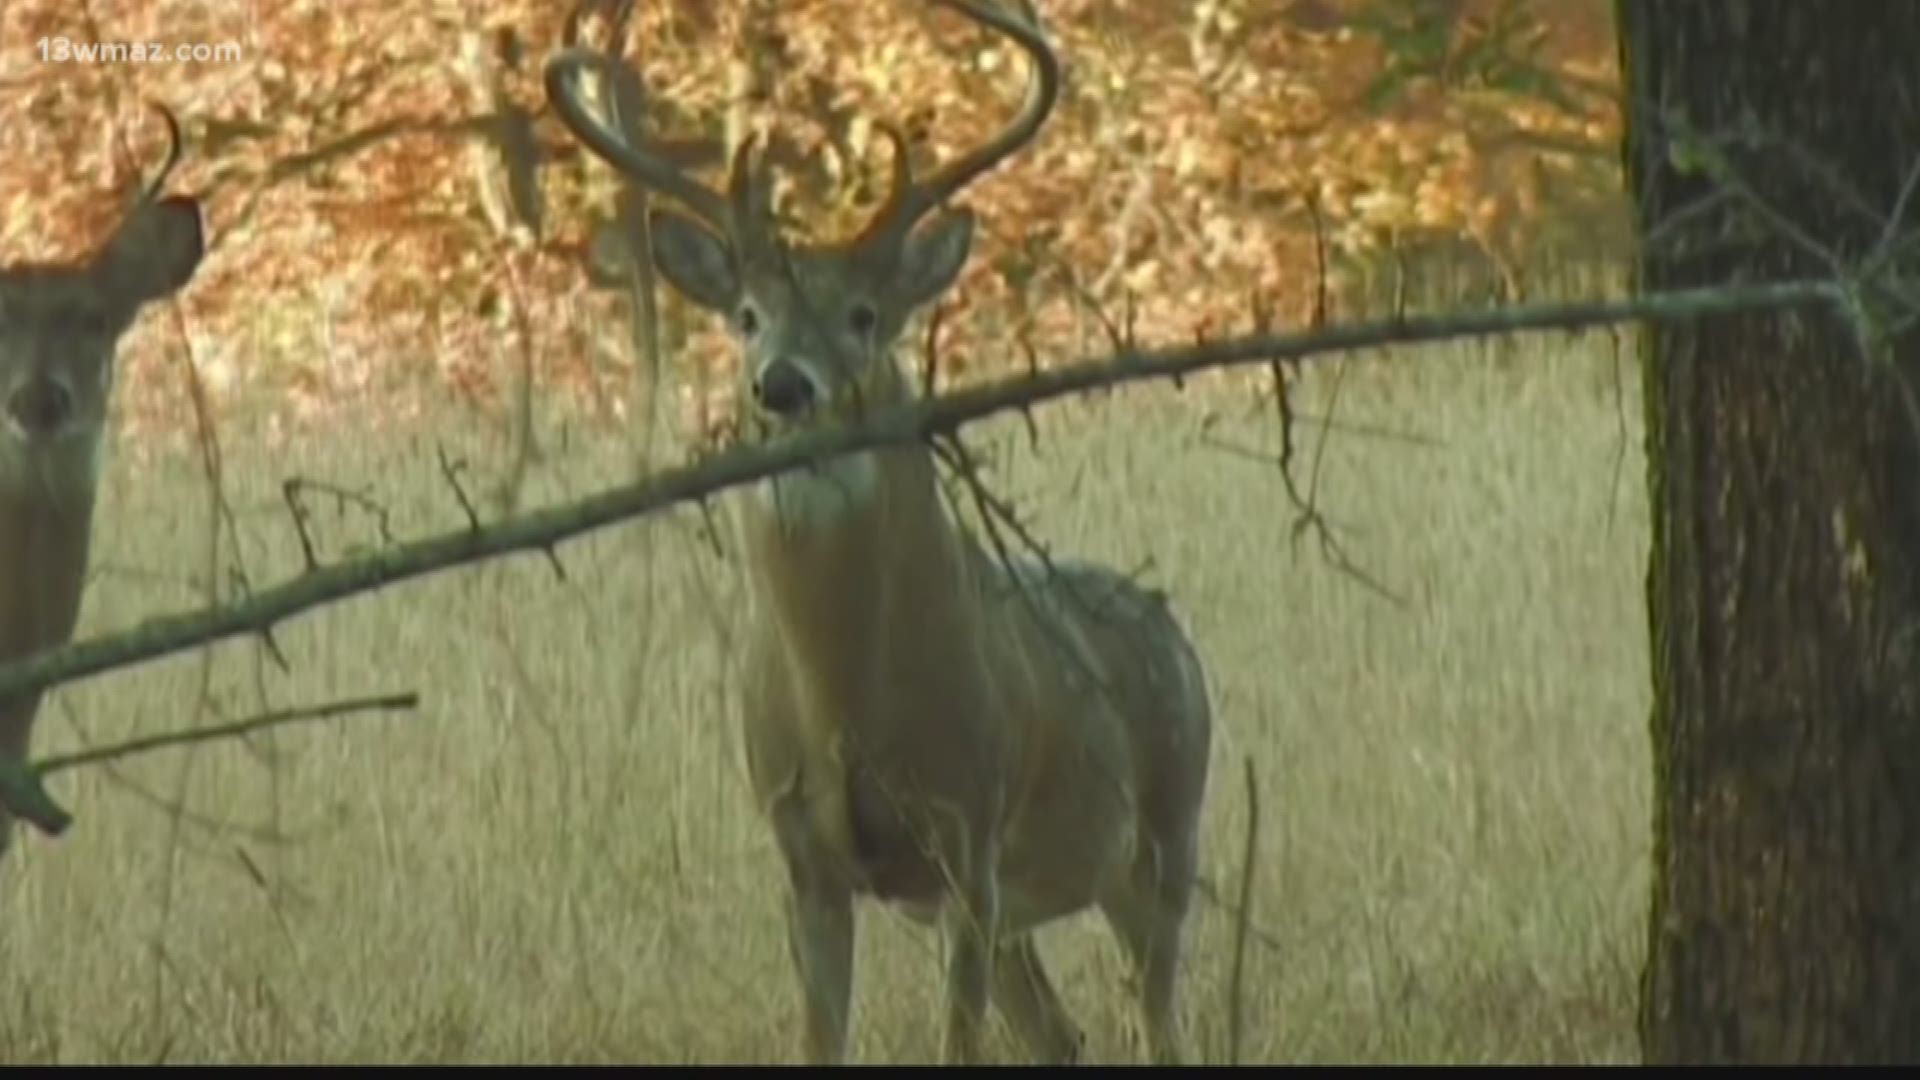 If you hunt in Bibb County, some commissioners are talking about cutting down on where you can shoot.